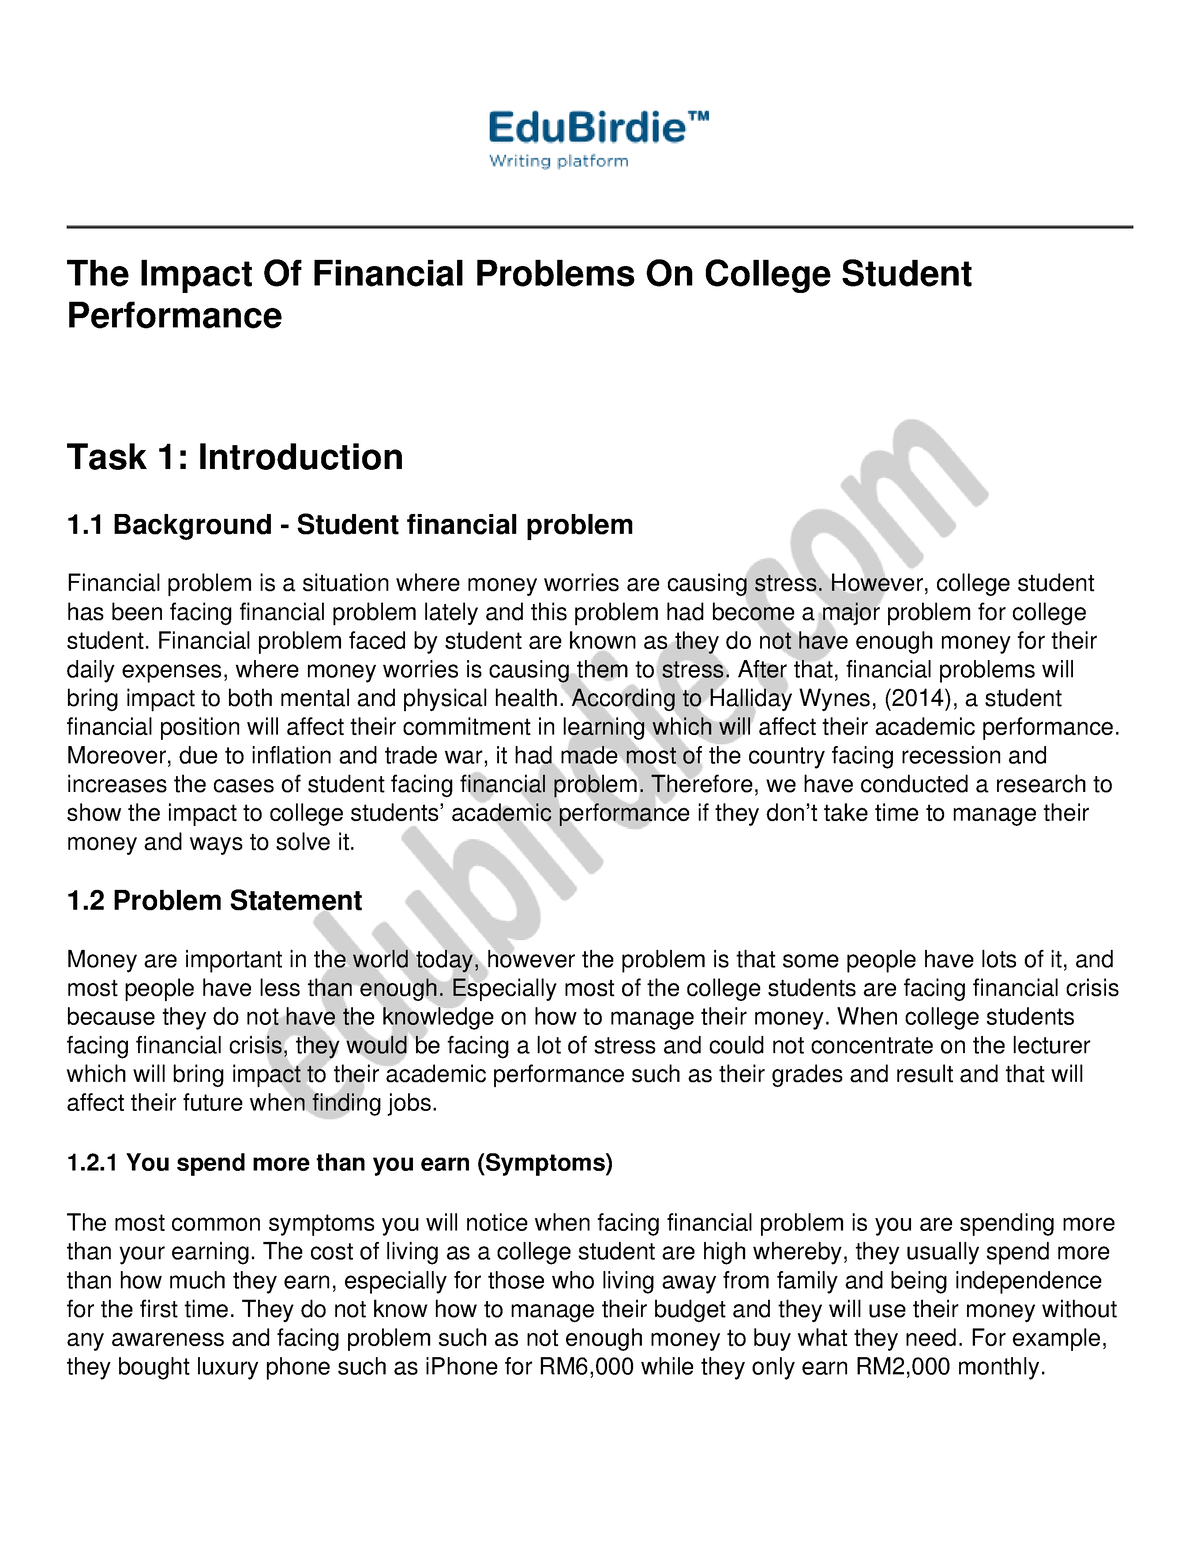 financial problem of working students research paper